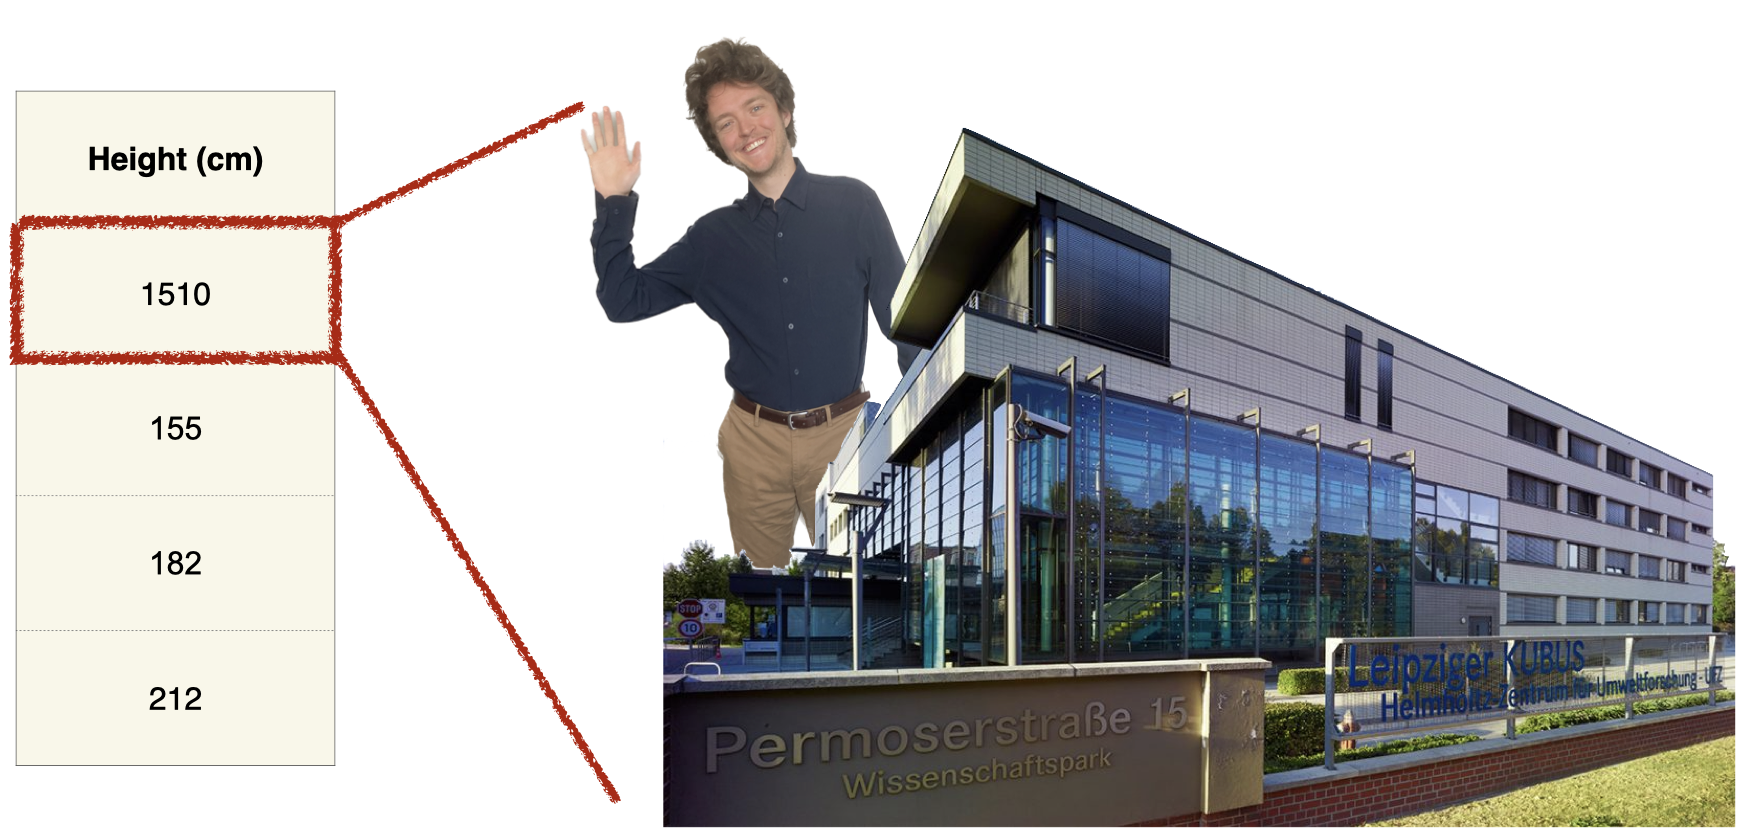 A single column of data recording heights of humans. One highlighted cell has a value of 15 meters and points to a picture of Devin photoshopped to be the same height as the conference building.